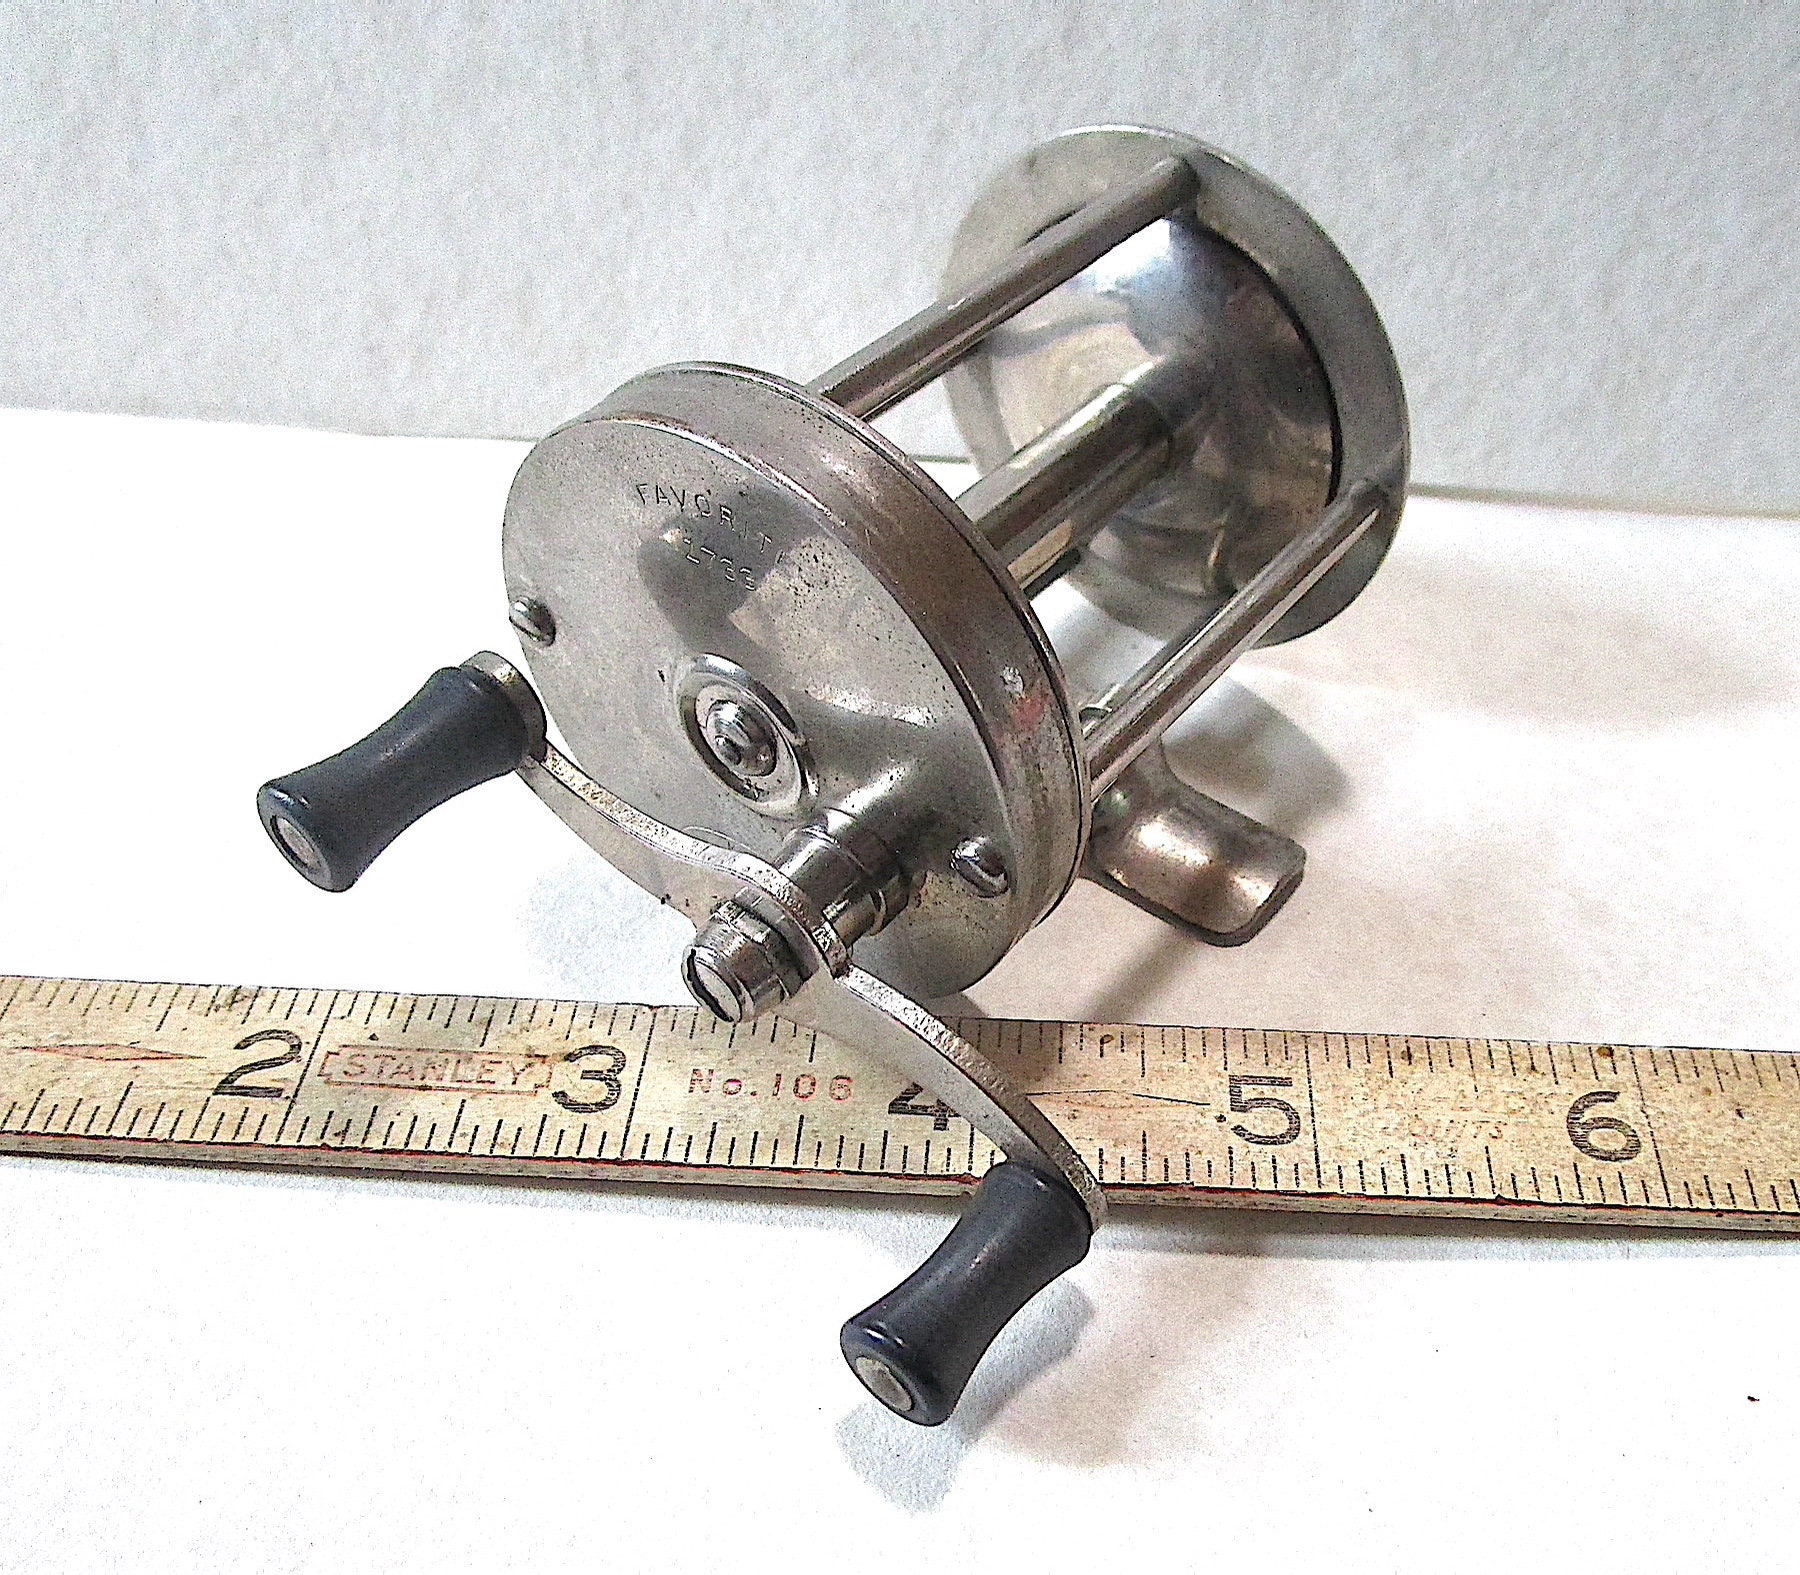 AW248 Vintage Shakespeare favorite VERY Old Fishing Reel EX Condition  Almost a screamer Great Old-time Tackle Classic 